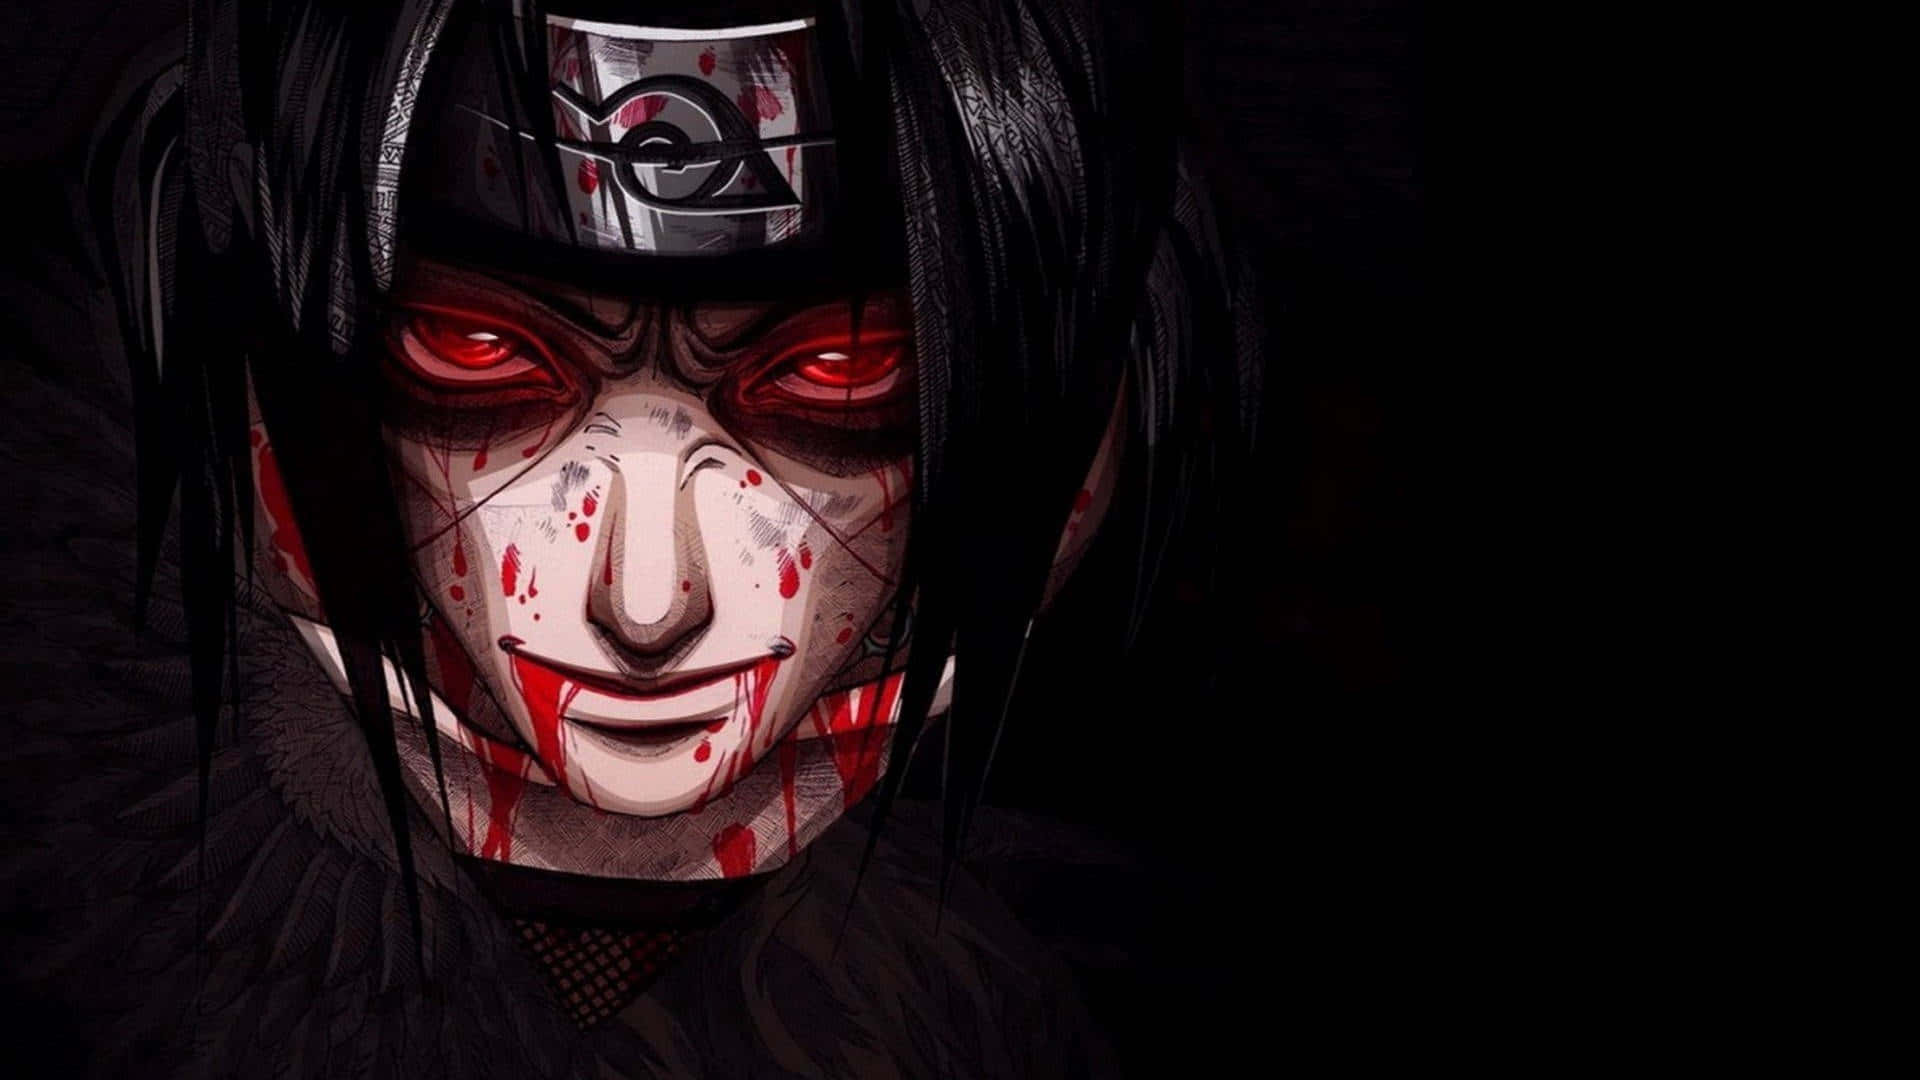 Naruto from the Naruto Shippuden Series with an Intimidating Look Wallpaper